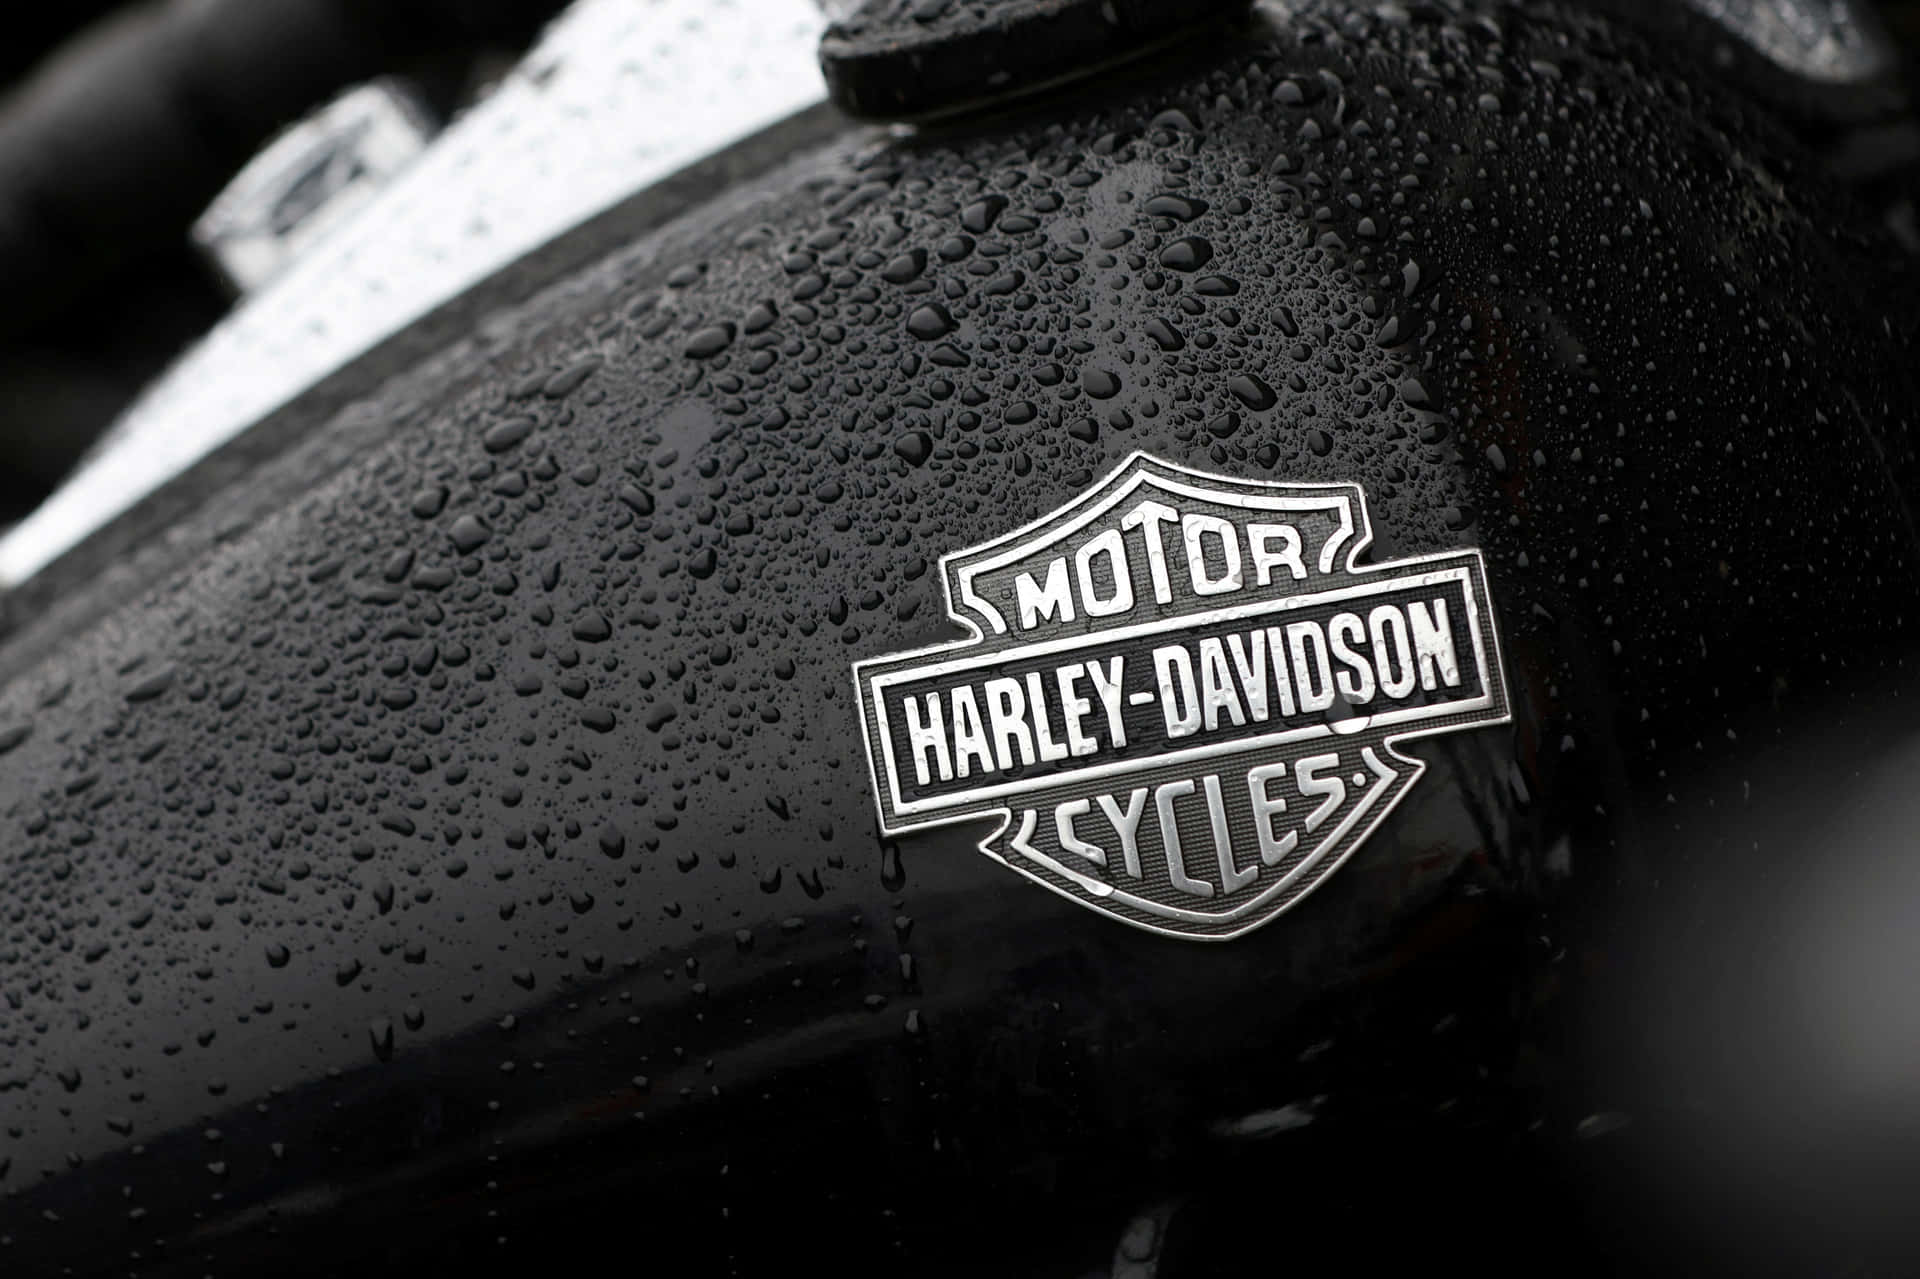 "Live The Dream with Harley Davidson Motorcycles"